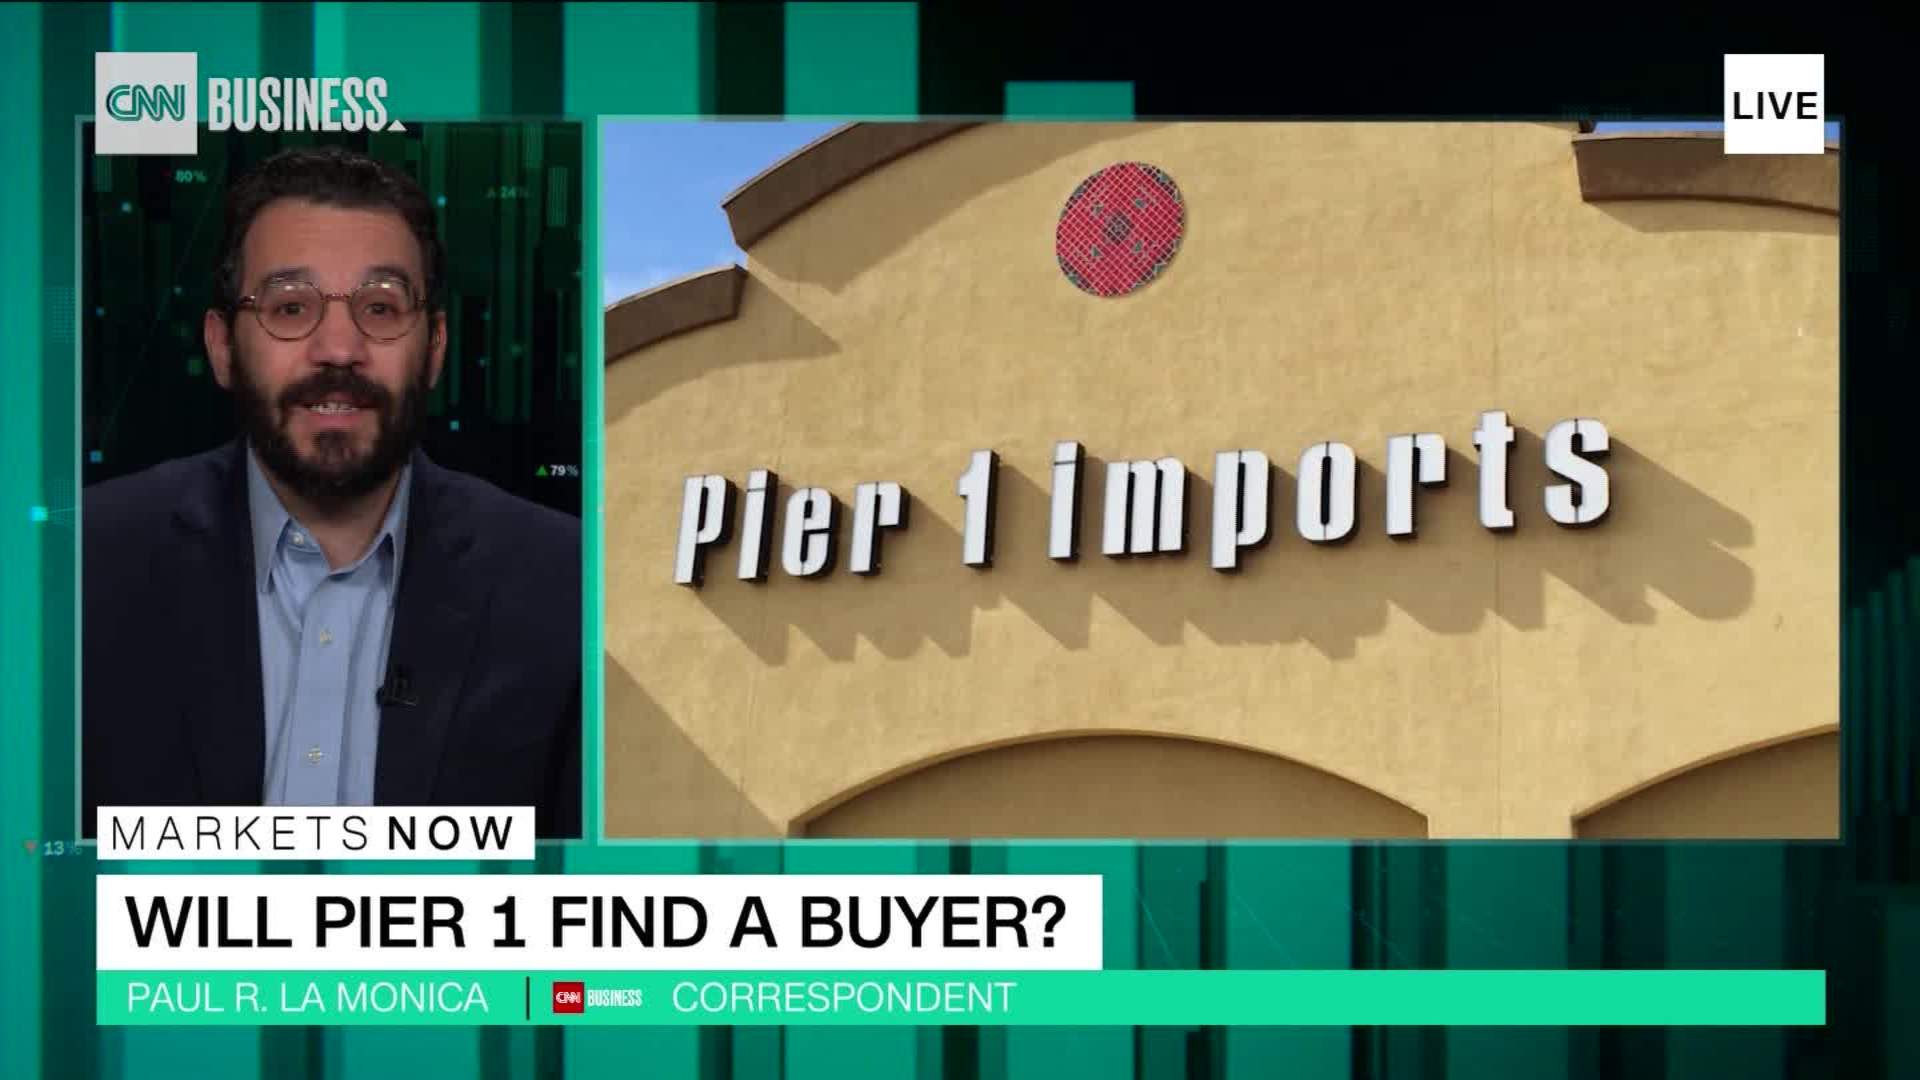 Pier 1 wants to close all its stores for good